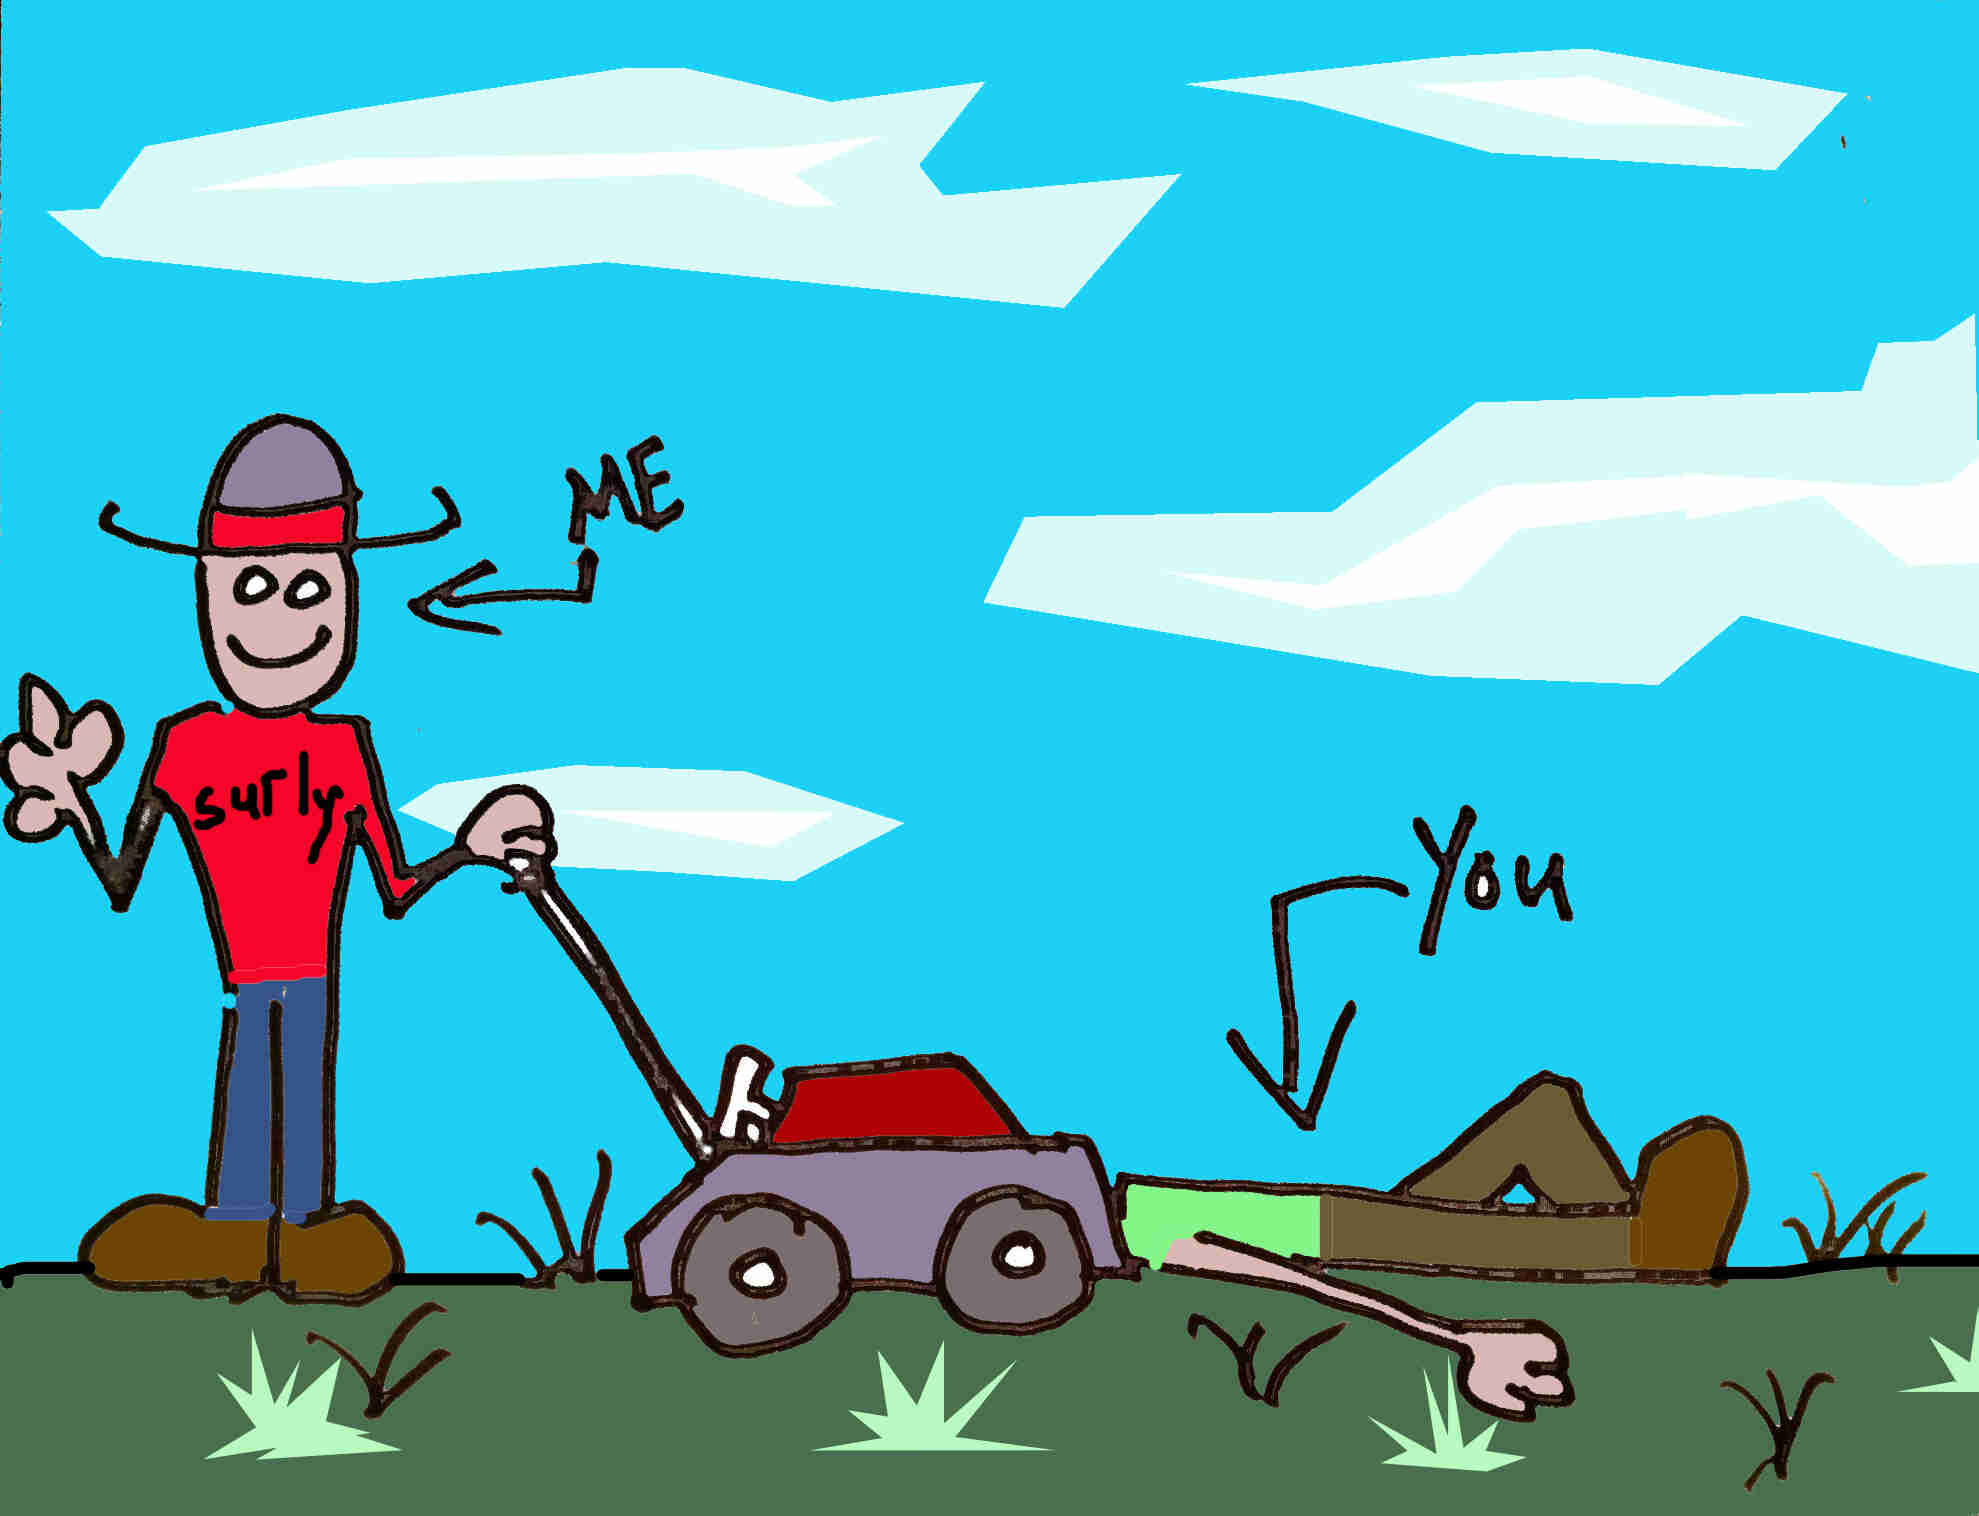 Color cartoon illustration of a person in a Surly t-shirt, standing with a lawnmower, over another person's head